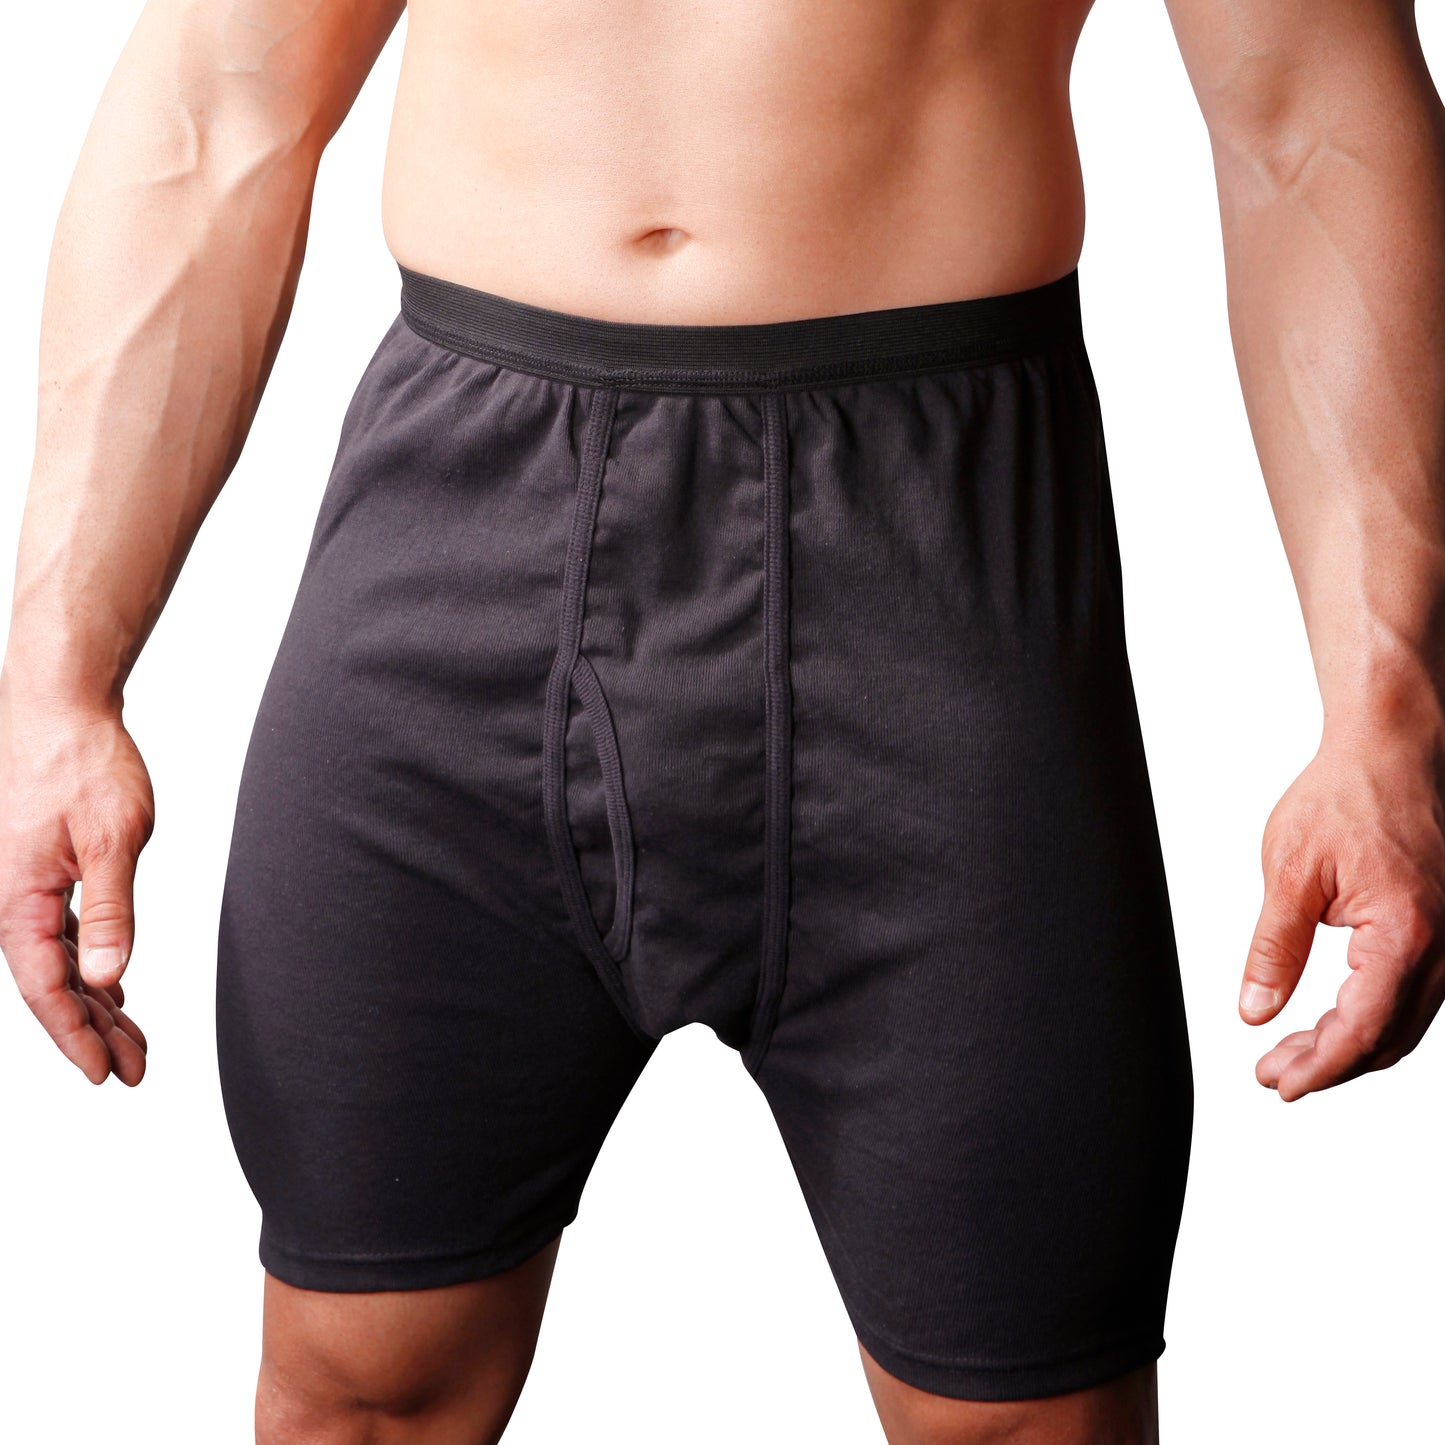  GIANTHONG Mens Underwear with Pouch for Balls Cotton Shorts Men  Mens Cotton Boxer Briefs Men's Underwear Men's Underwear 3x Boxer Briefs  for Men Big and Tall : Ropa, Zapatos y Joyería